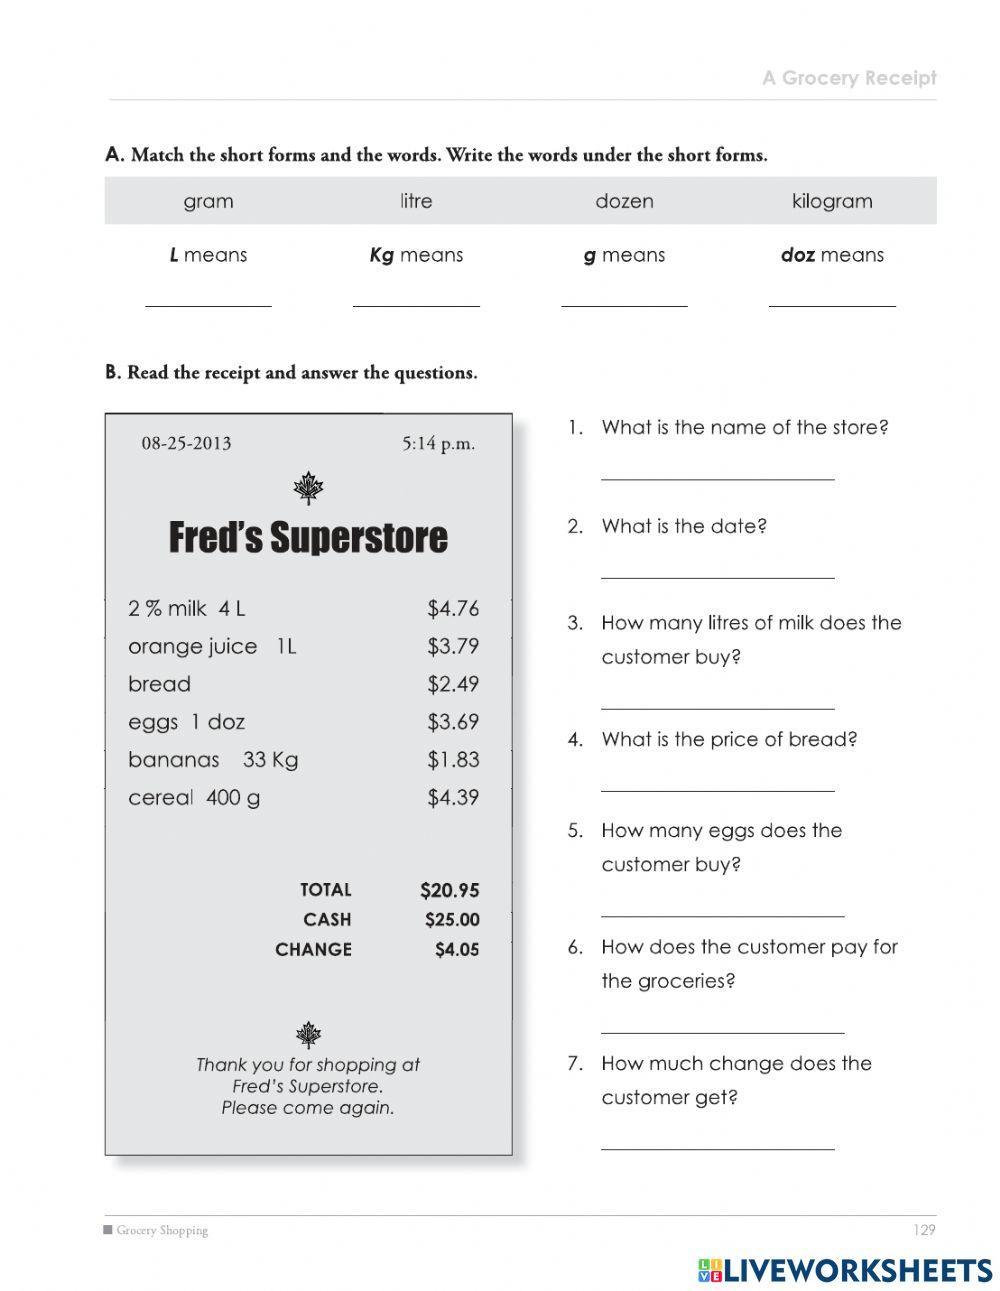 CLB 1 Reading Assessment - Grocery Receipt